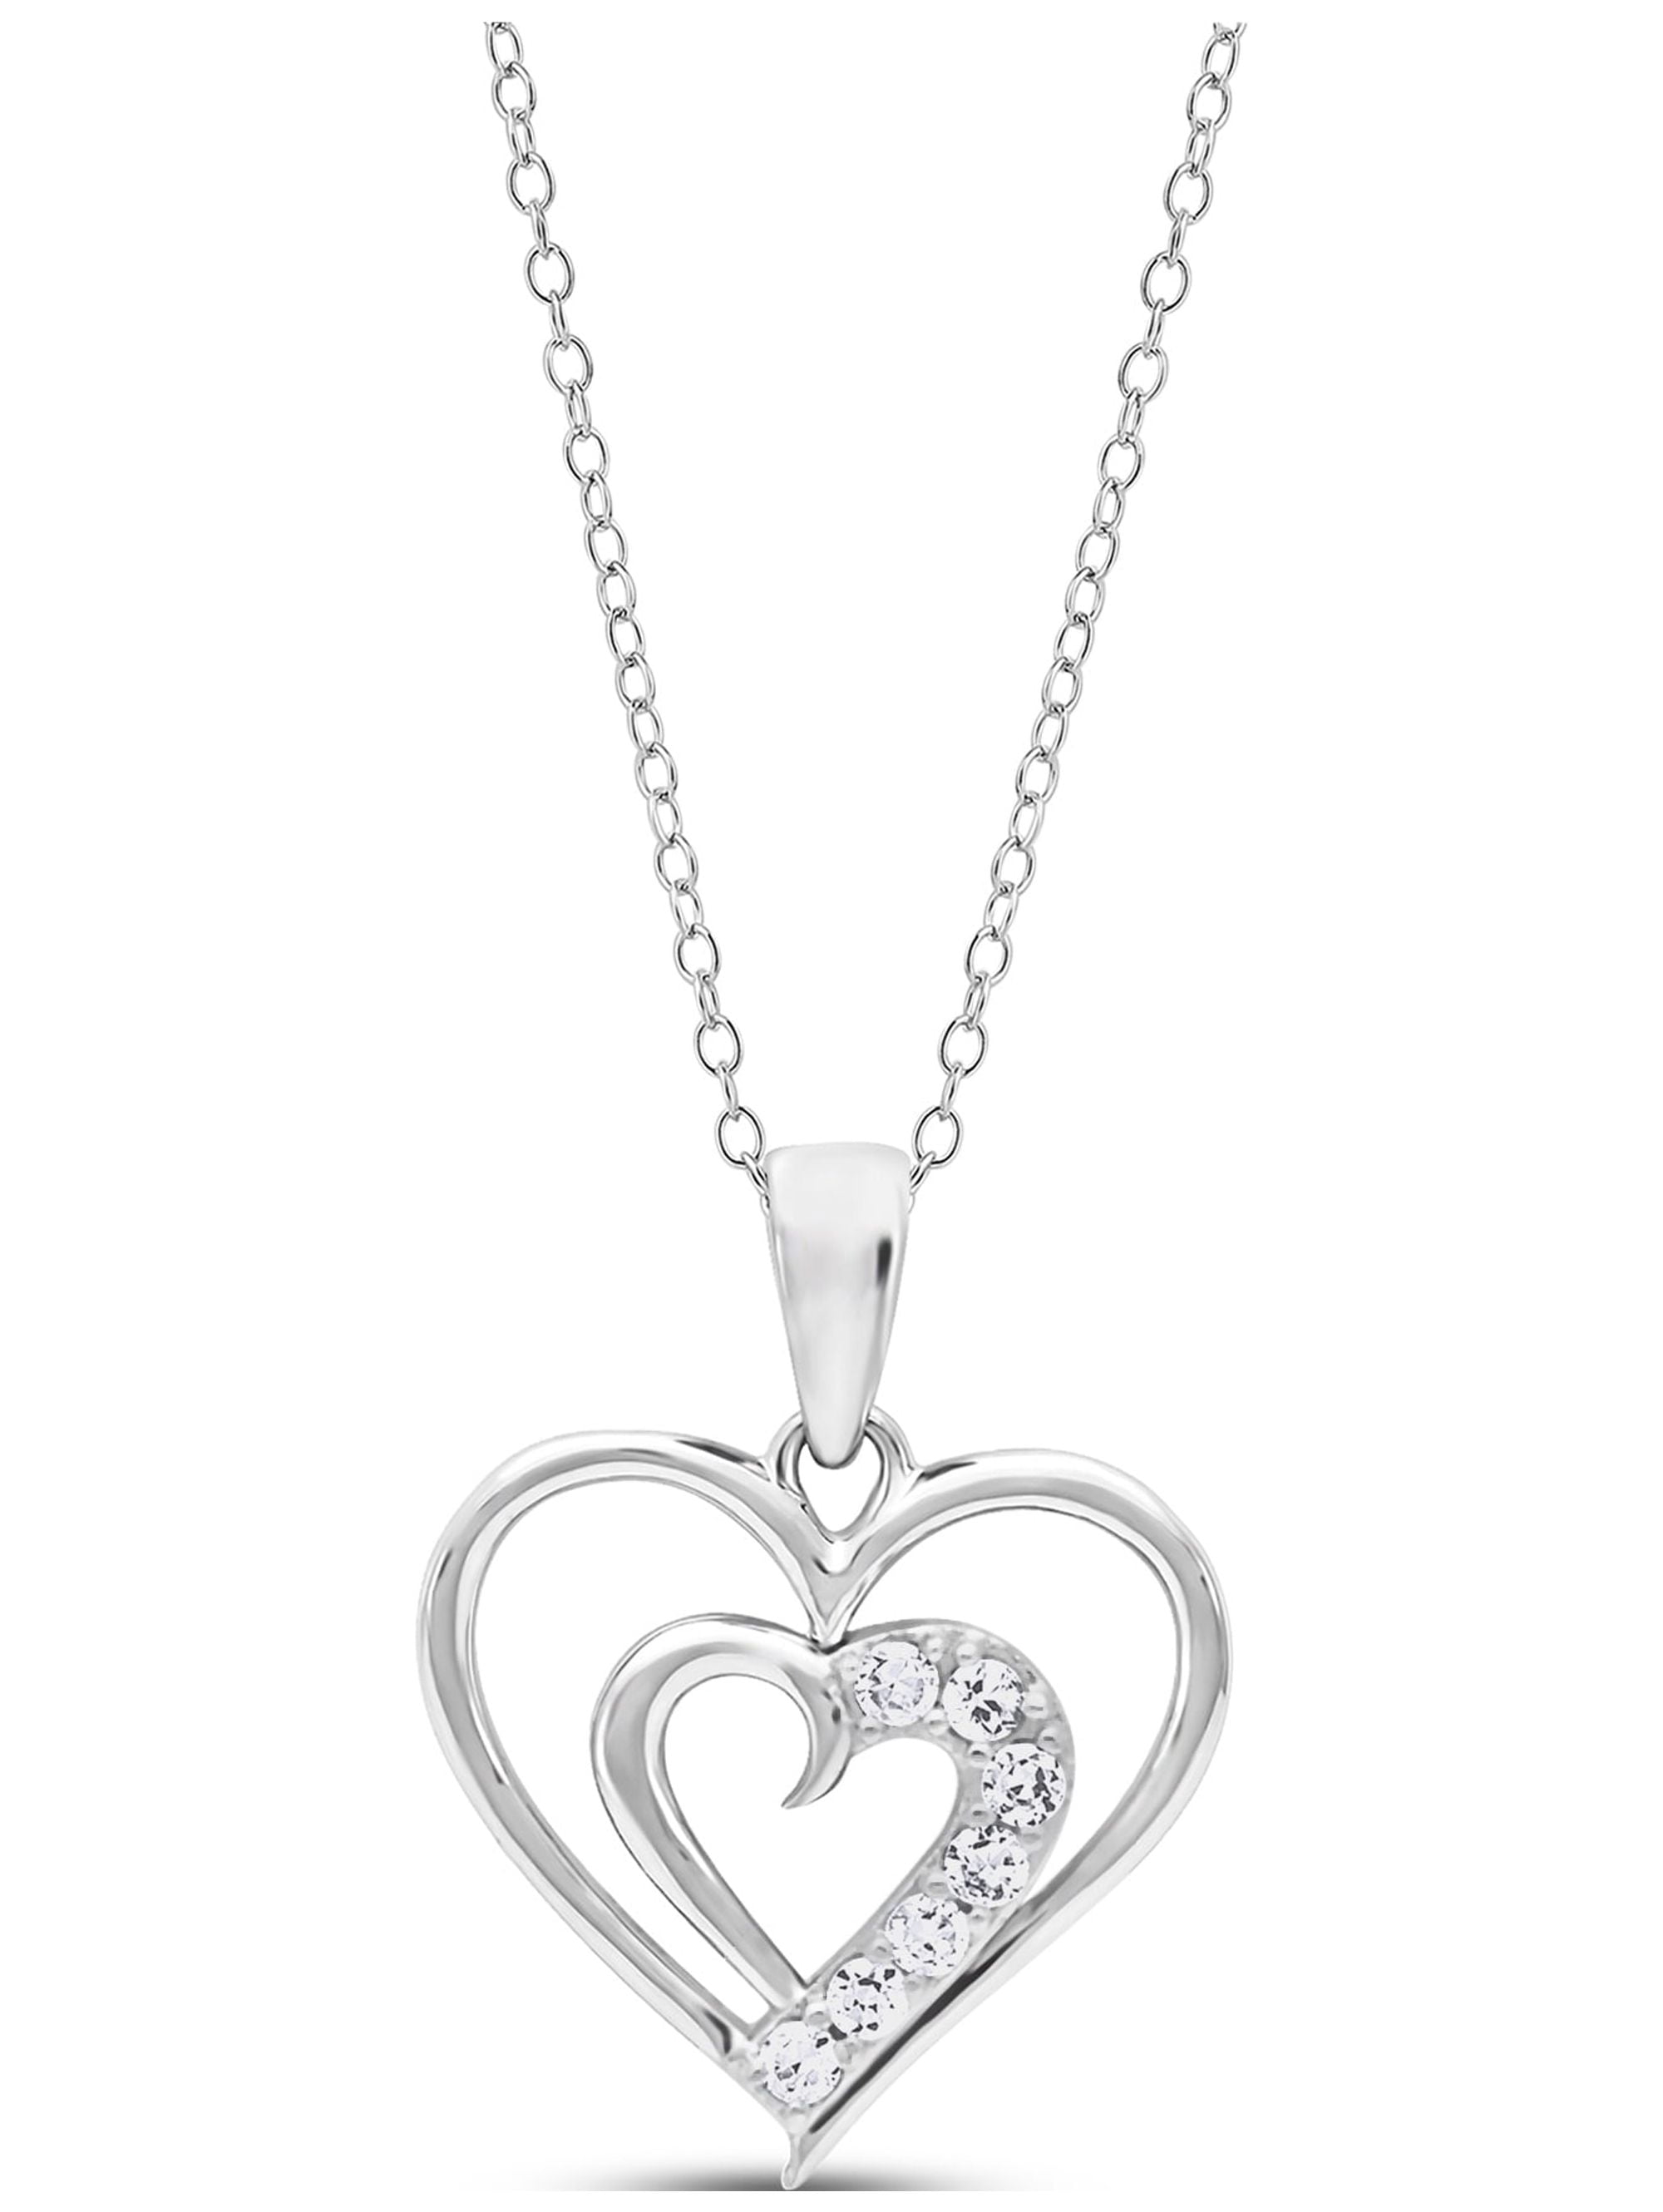 White CZ Sterling Silver Double Polished Heart Pendant, 18